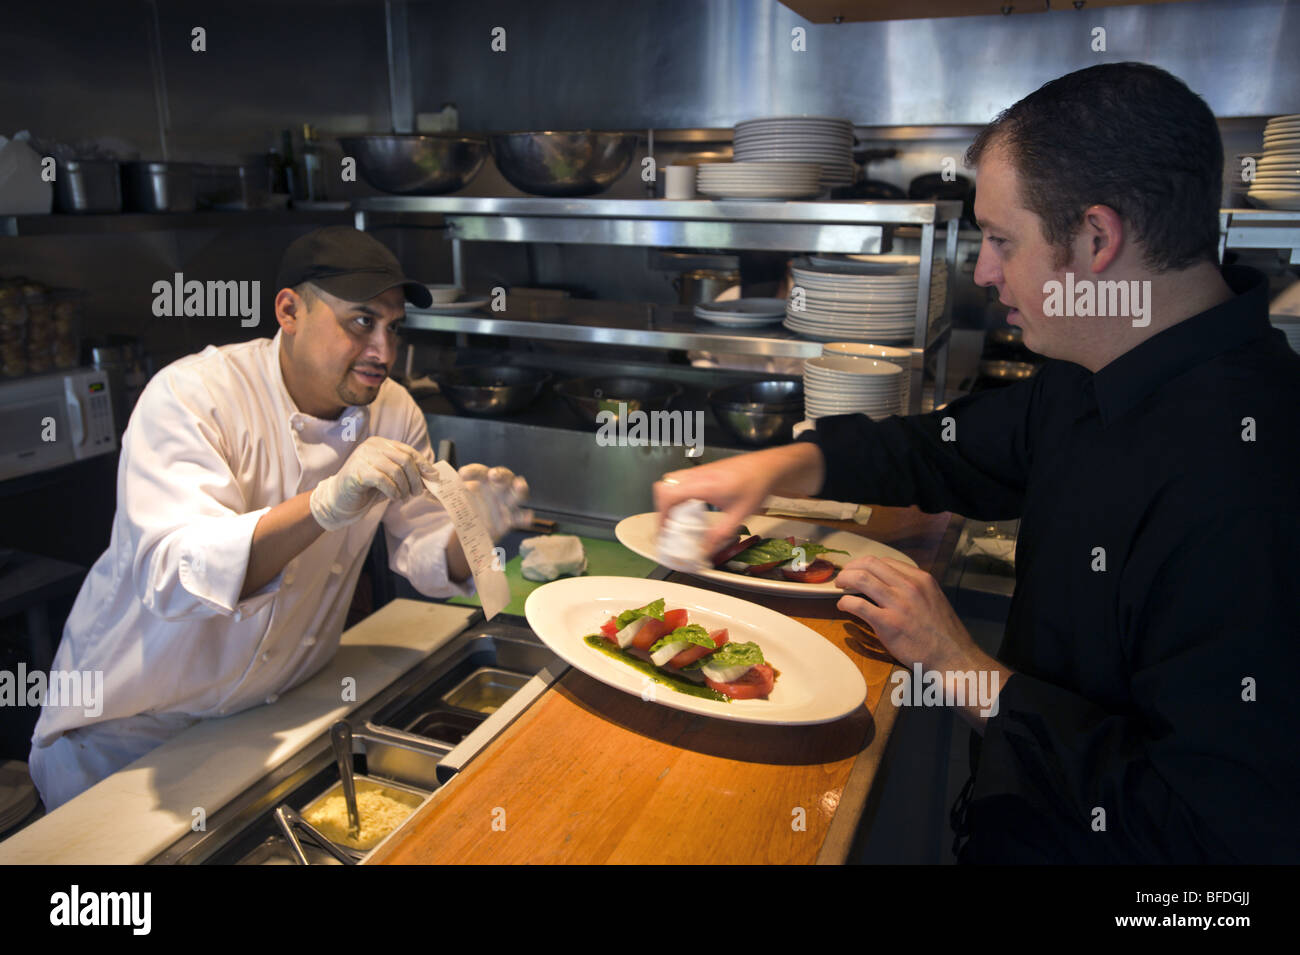 A hispanic worker works as a cook at an upscale Italian restaurant, Cucina Colore, in the Cherry Creek North area of Denver, Col Stock Photo